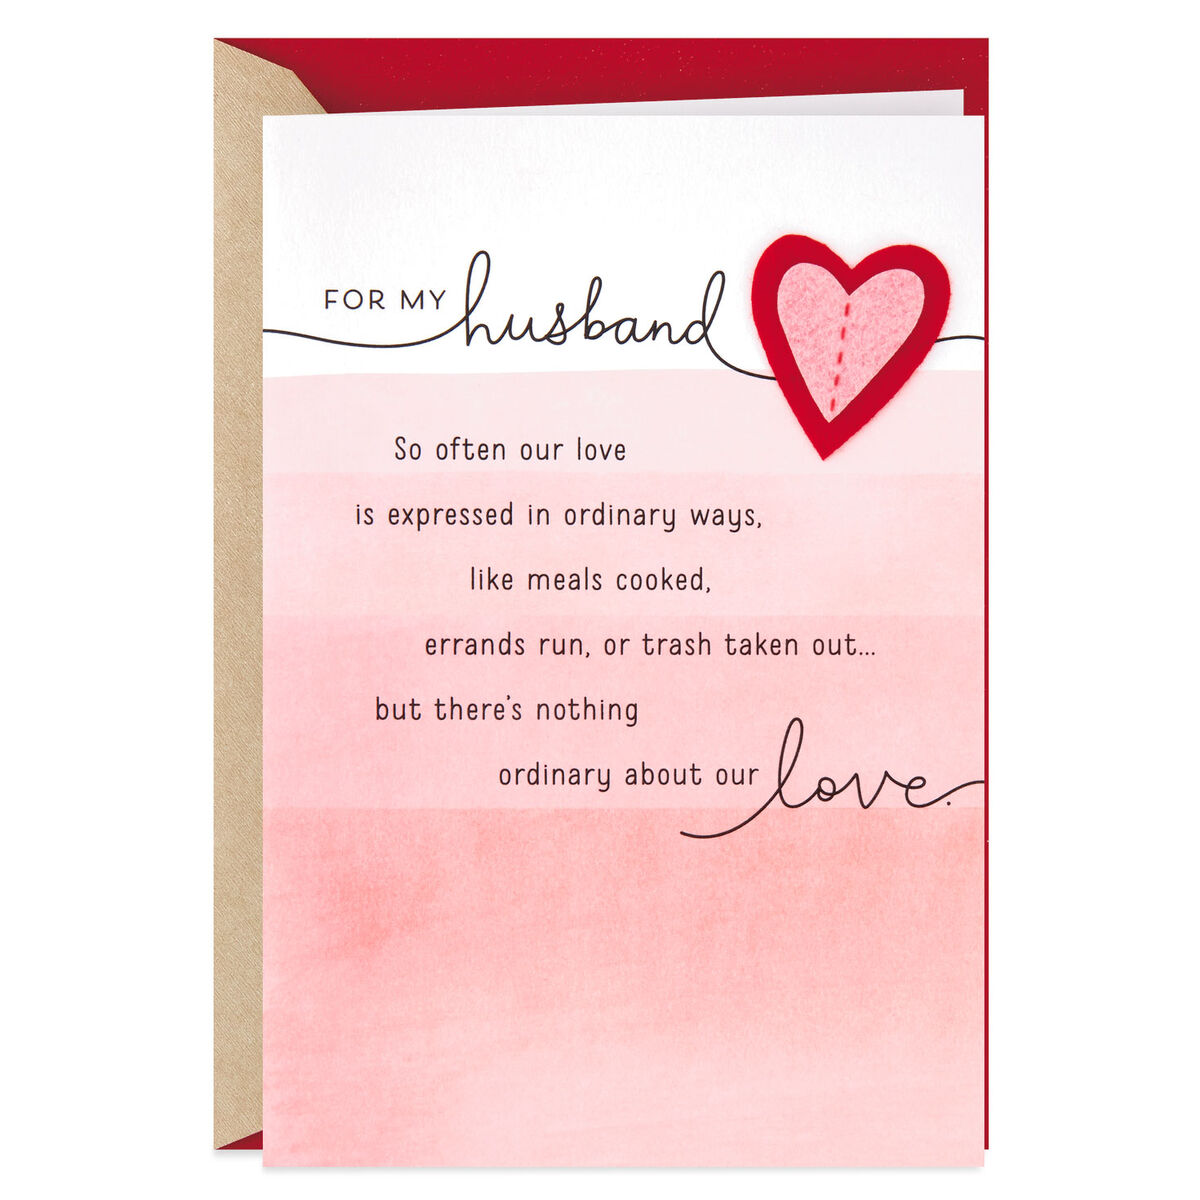 Nothing Ordinary About Our Love Valentine's Day Card for Husband ...